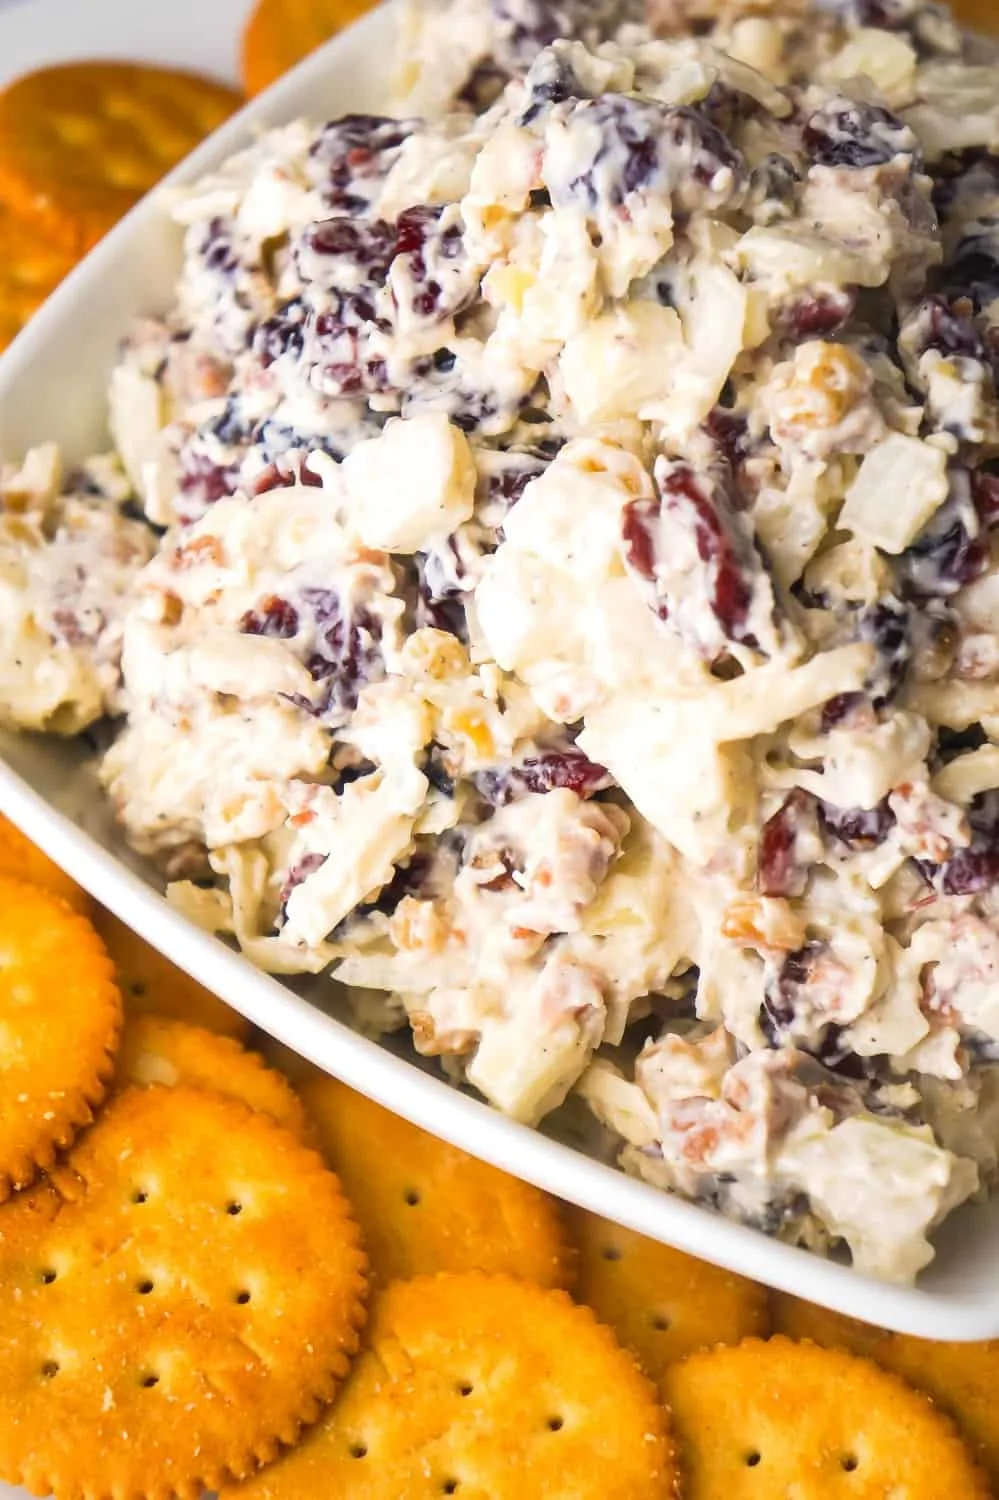 Bacon Cranberry Walnut Dip is an easy cold dip recipe perfect for serving with crackers. This cold party dip is loaded with bacon, Swiss cheese, dried cranberries and chopped walnuts.